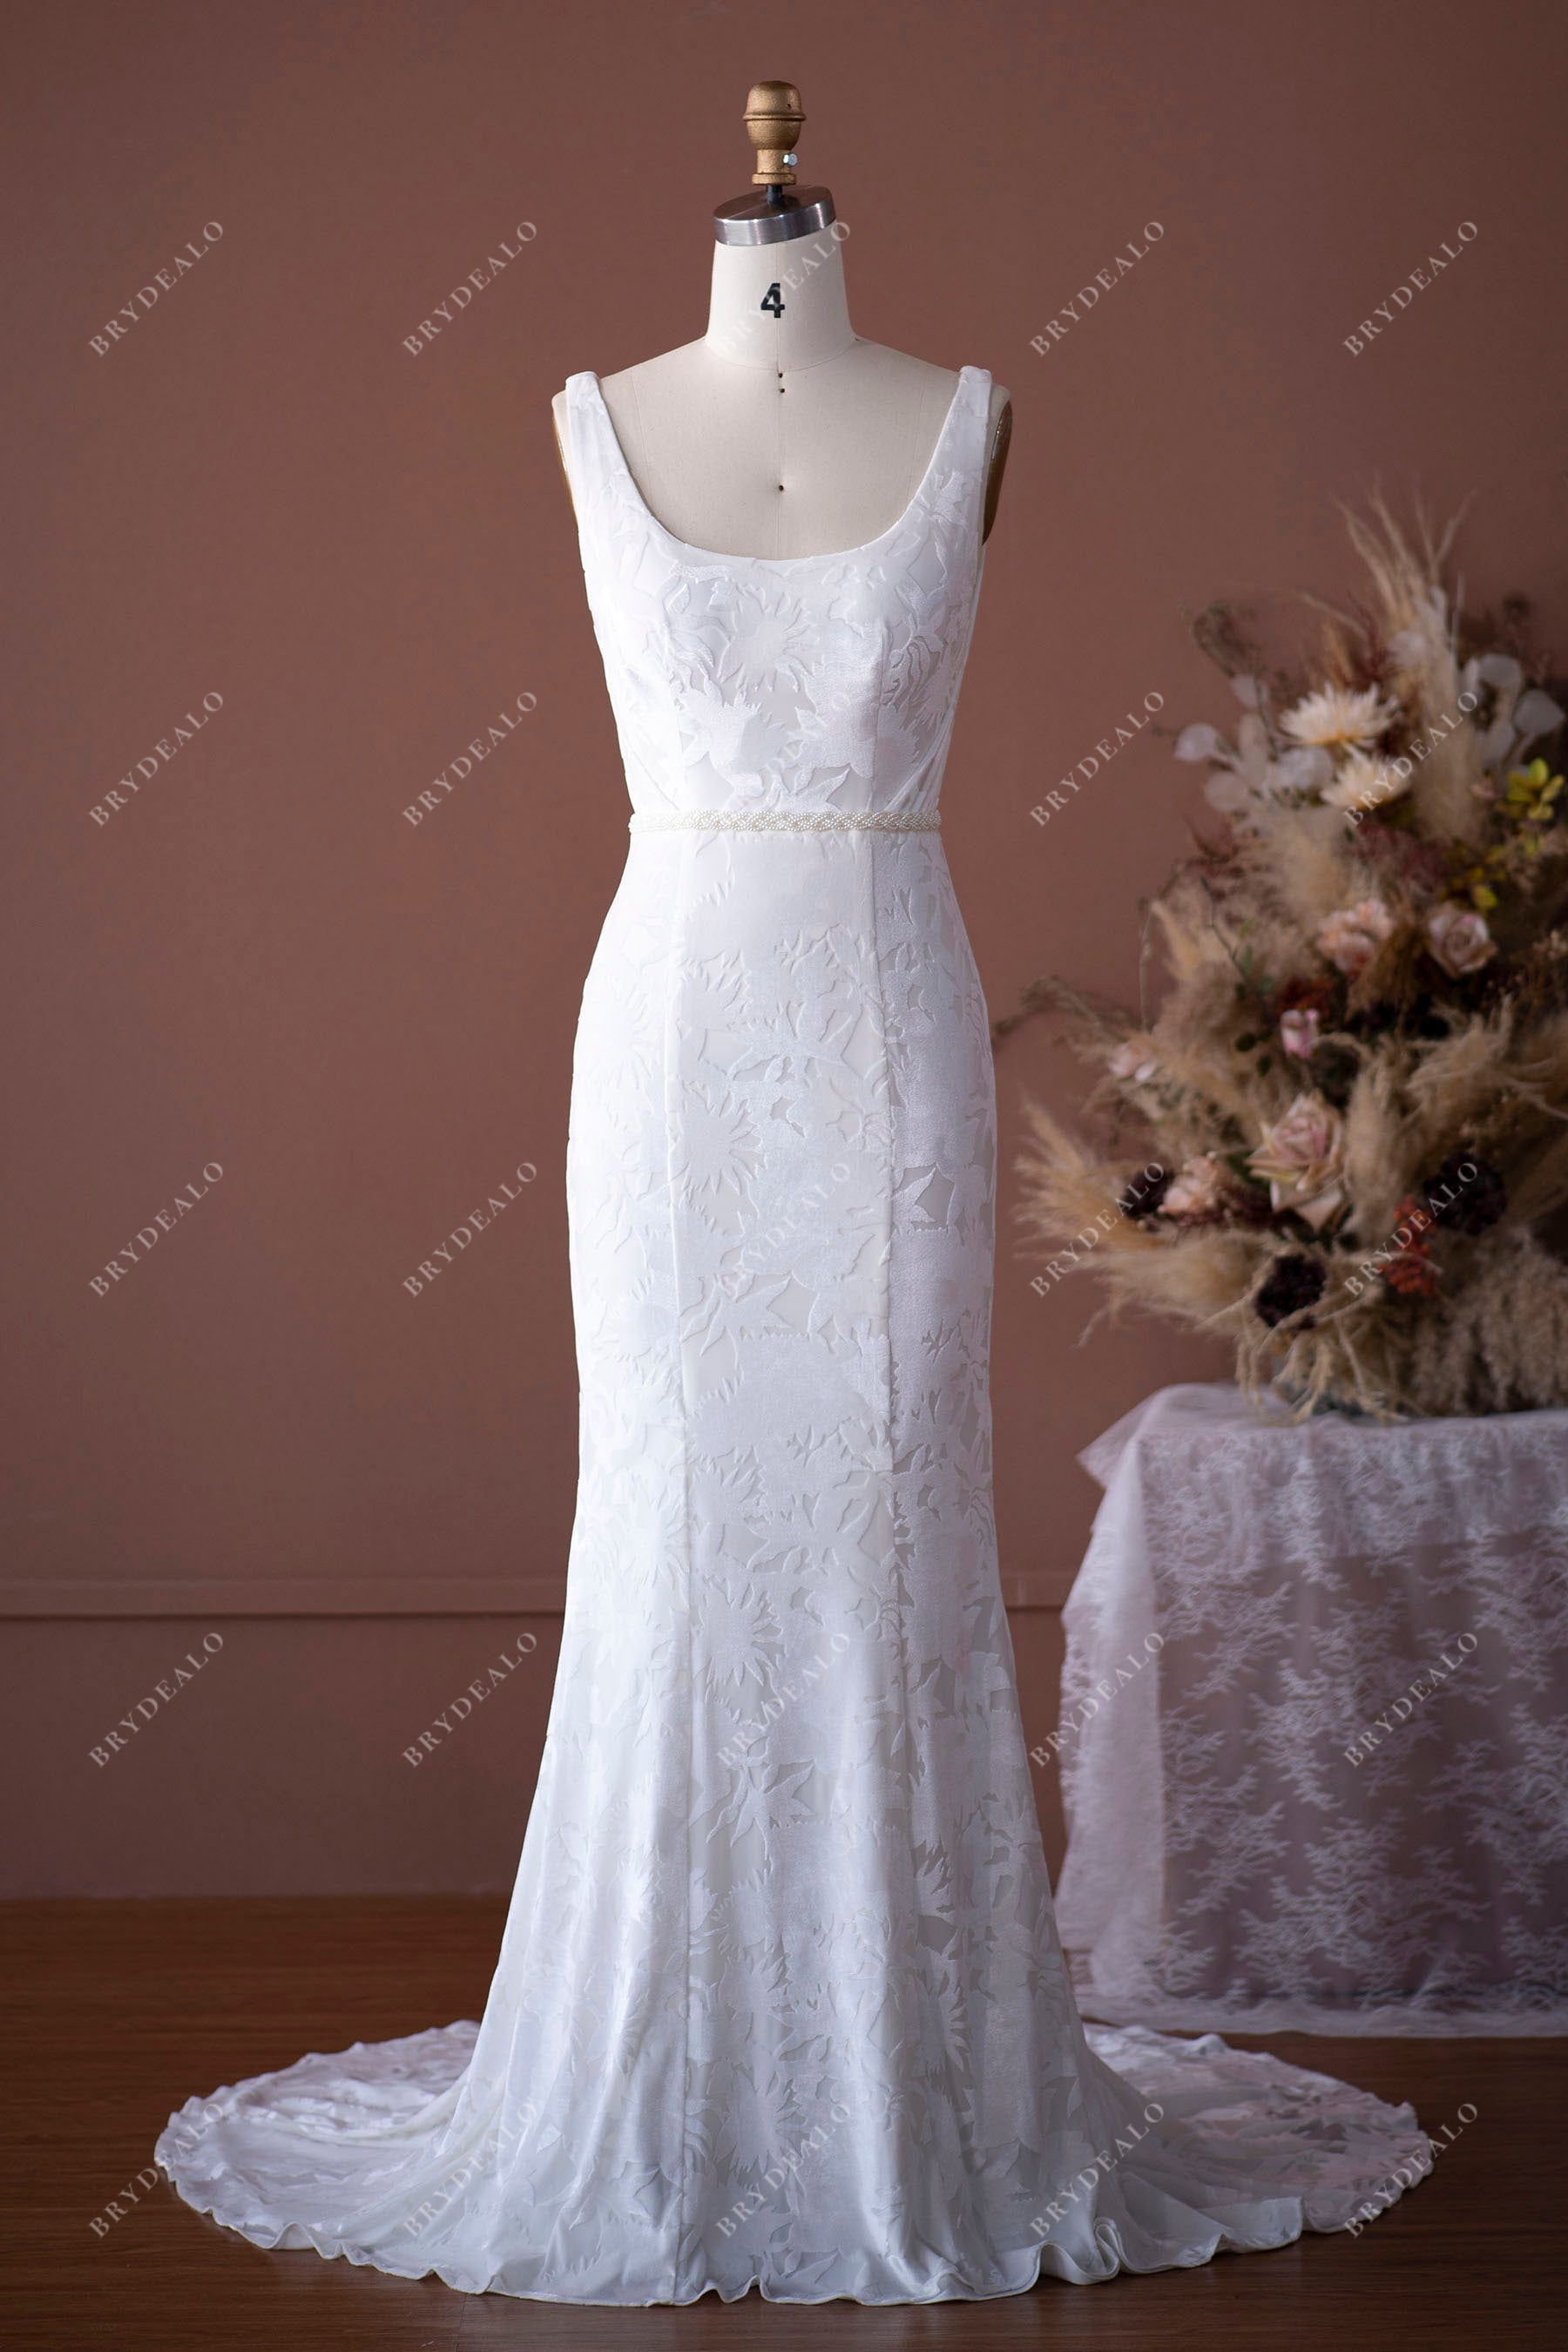 Sleeveless Square Neckline Fit And Flare Wedding Dress With Back Bow